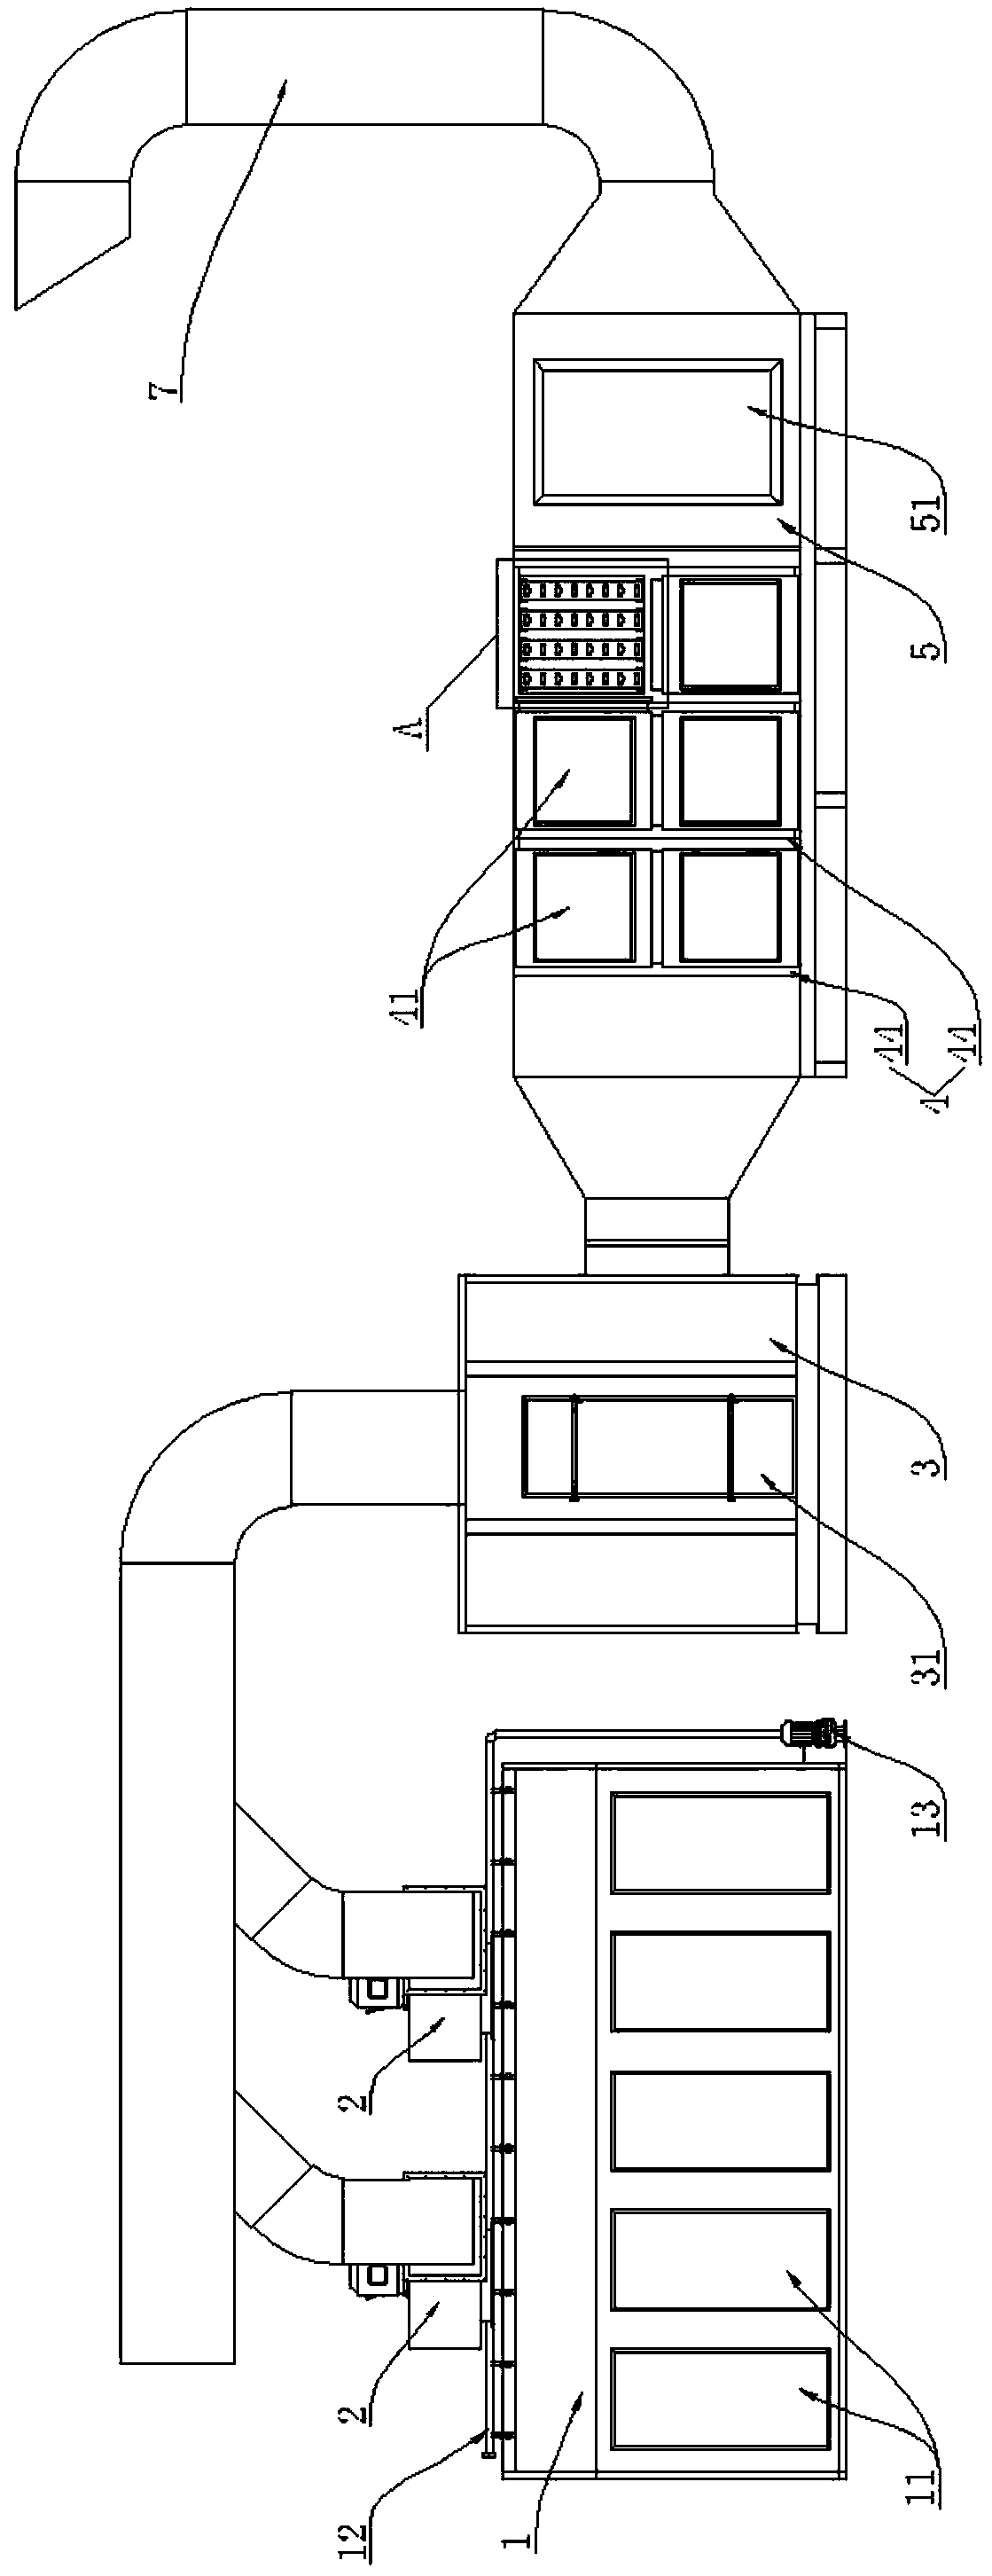 Waste gas treatment device and process of water based paint